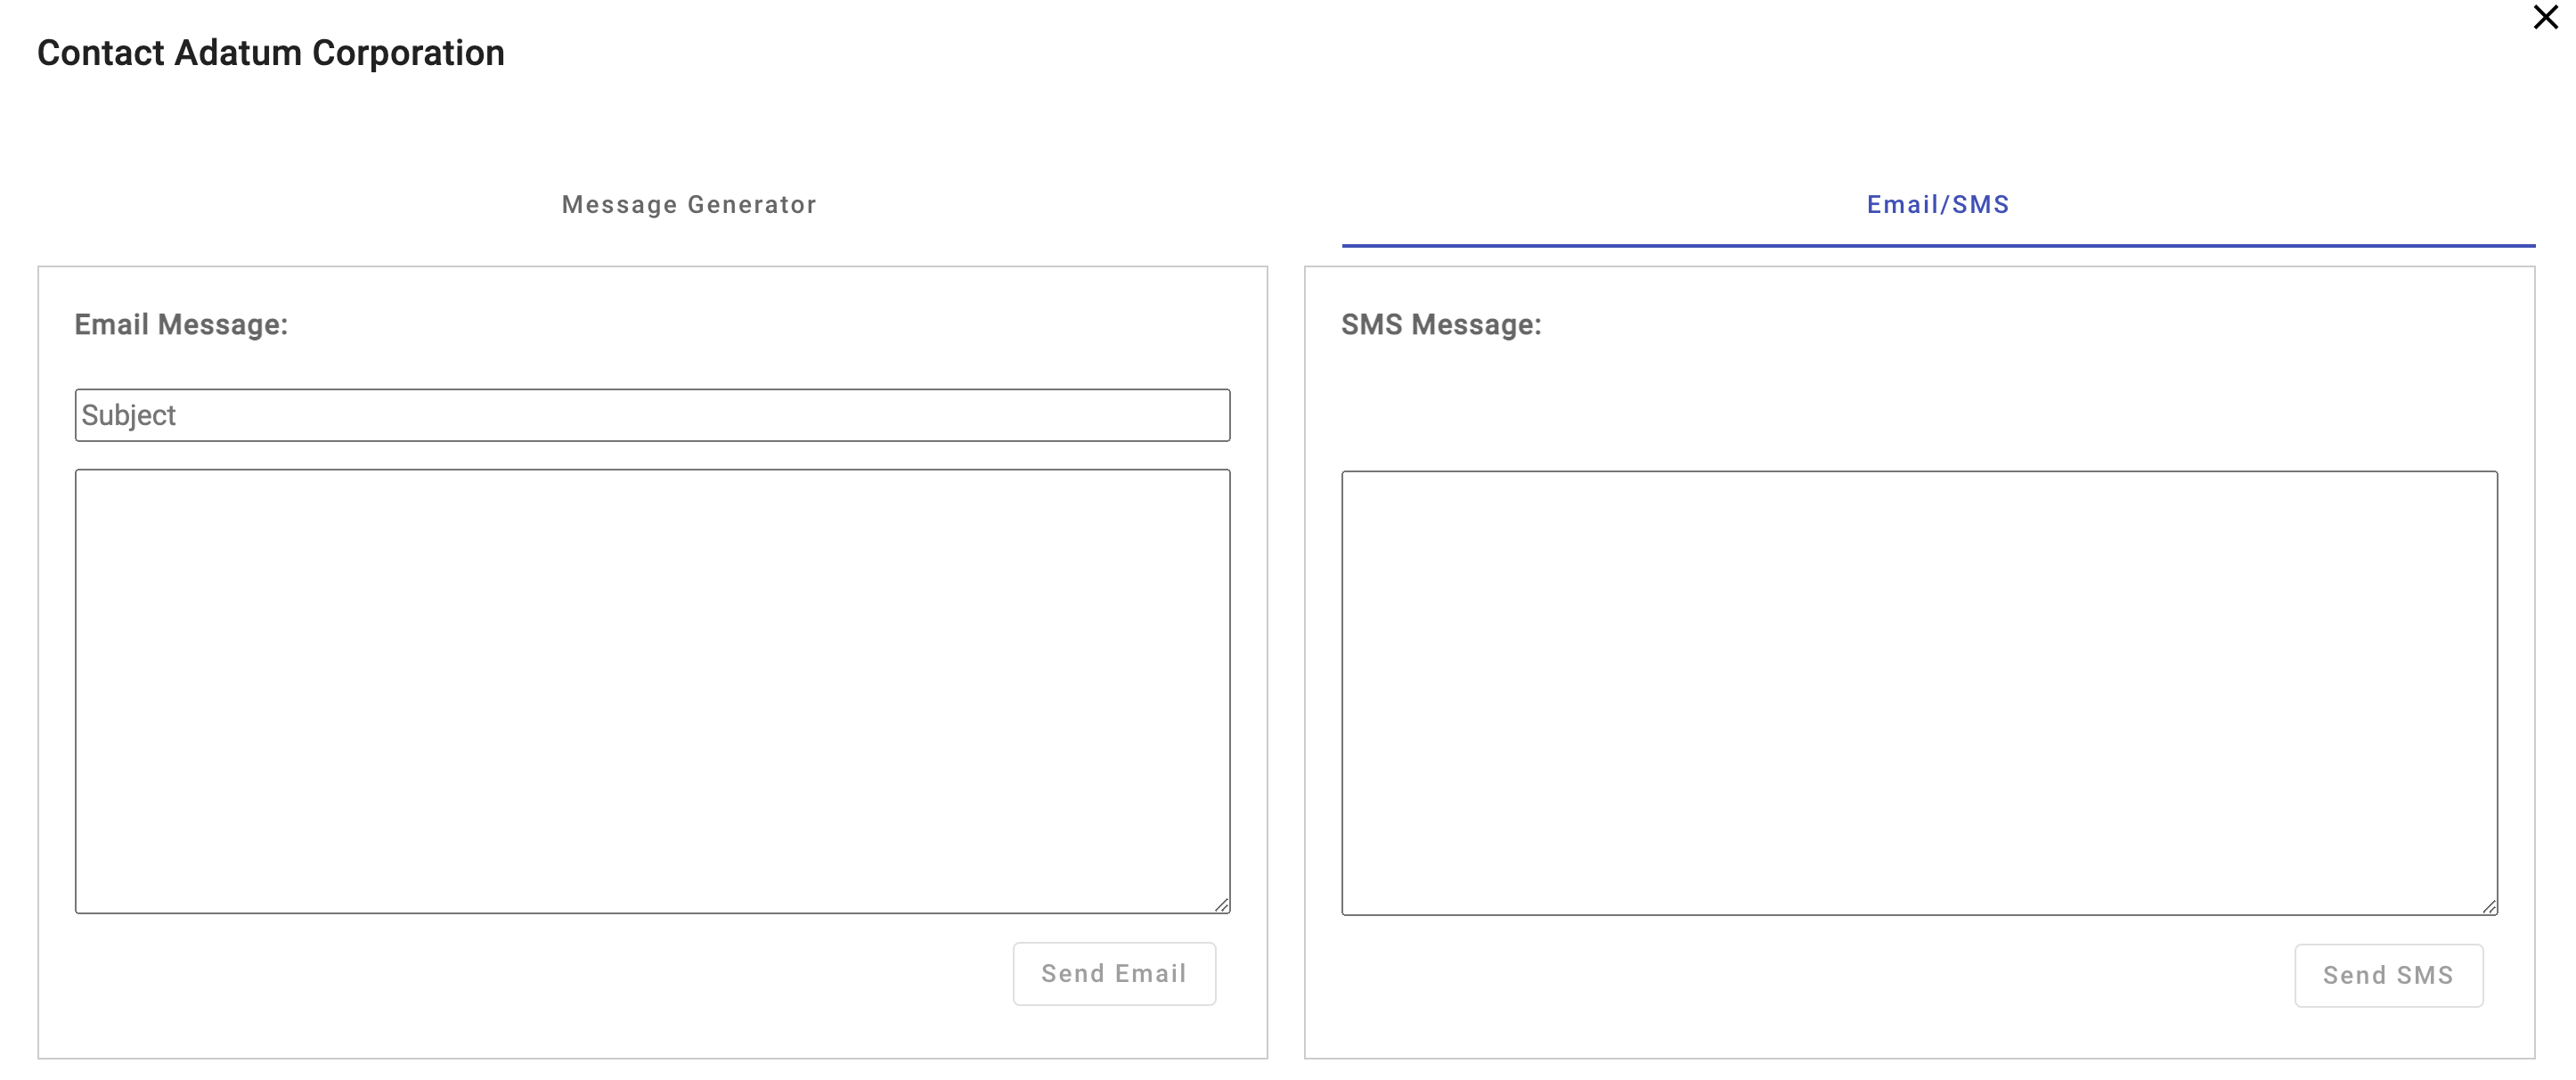 Email/SMS Customer dialog box.